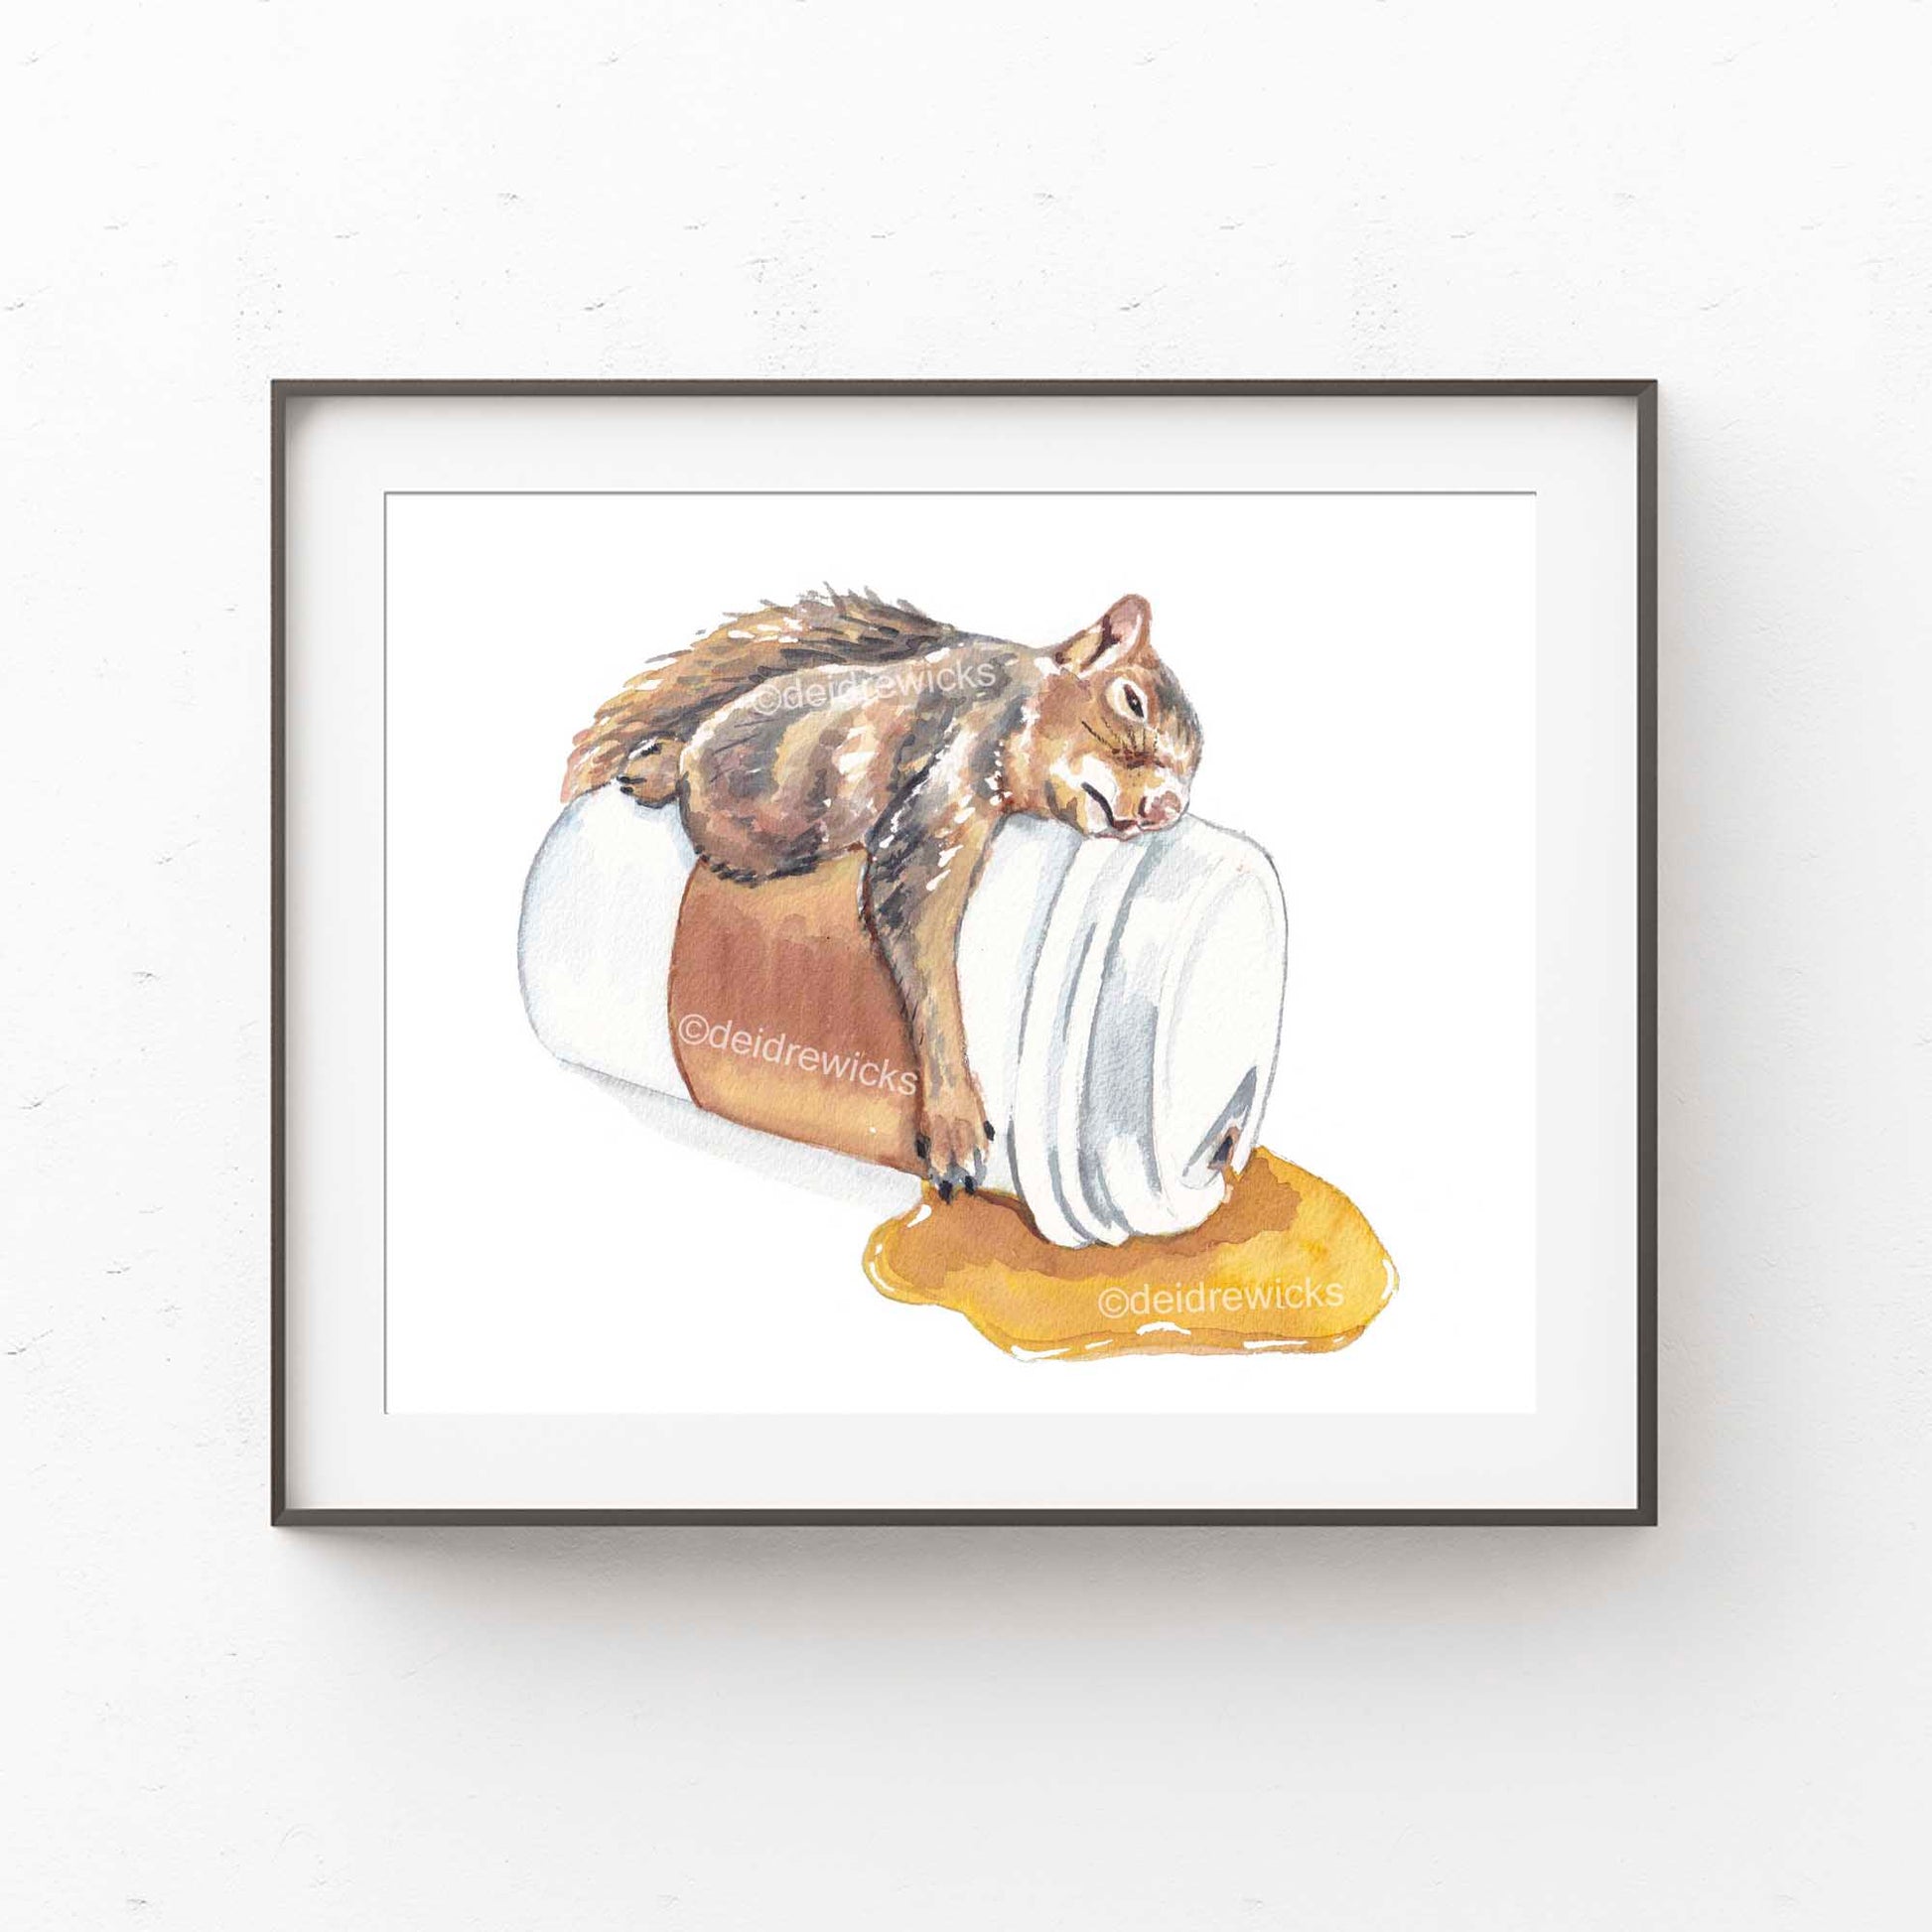 Framing suggestion for a watercolour print of a squirrel sleeping on a cup of coffee